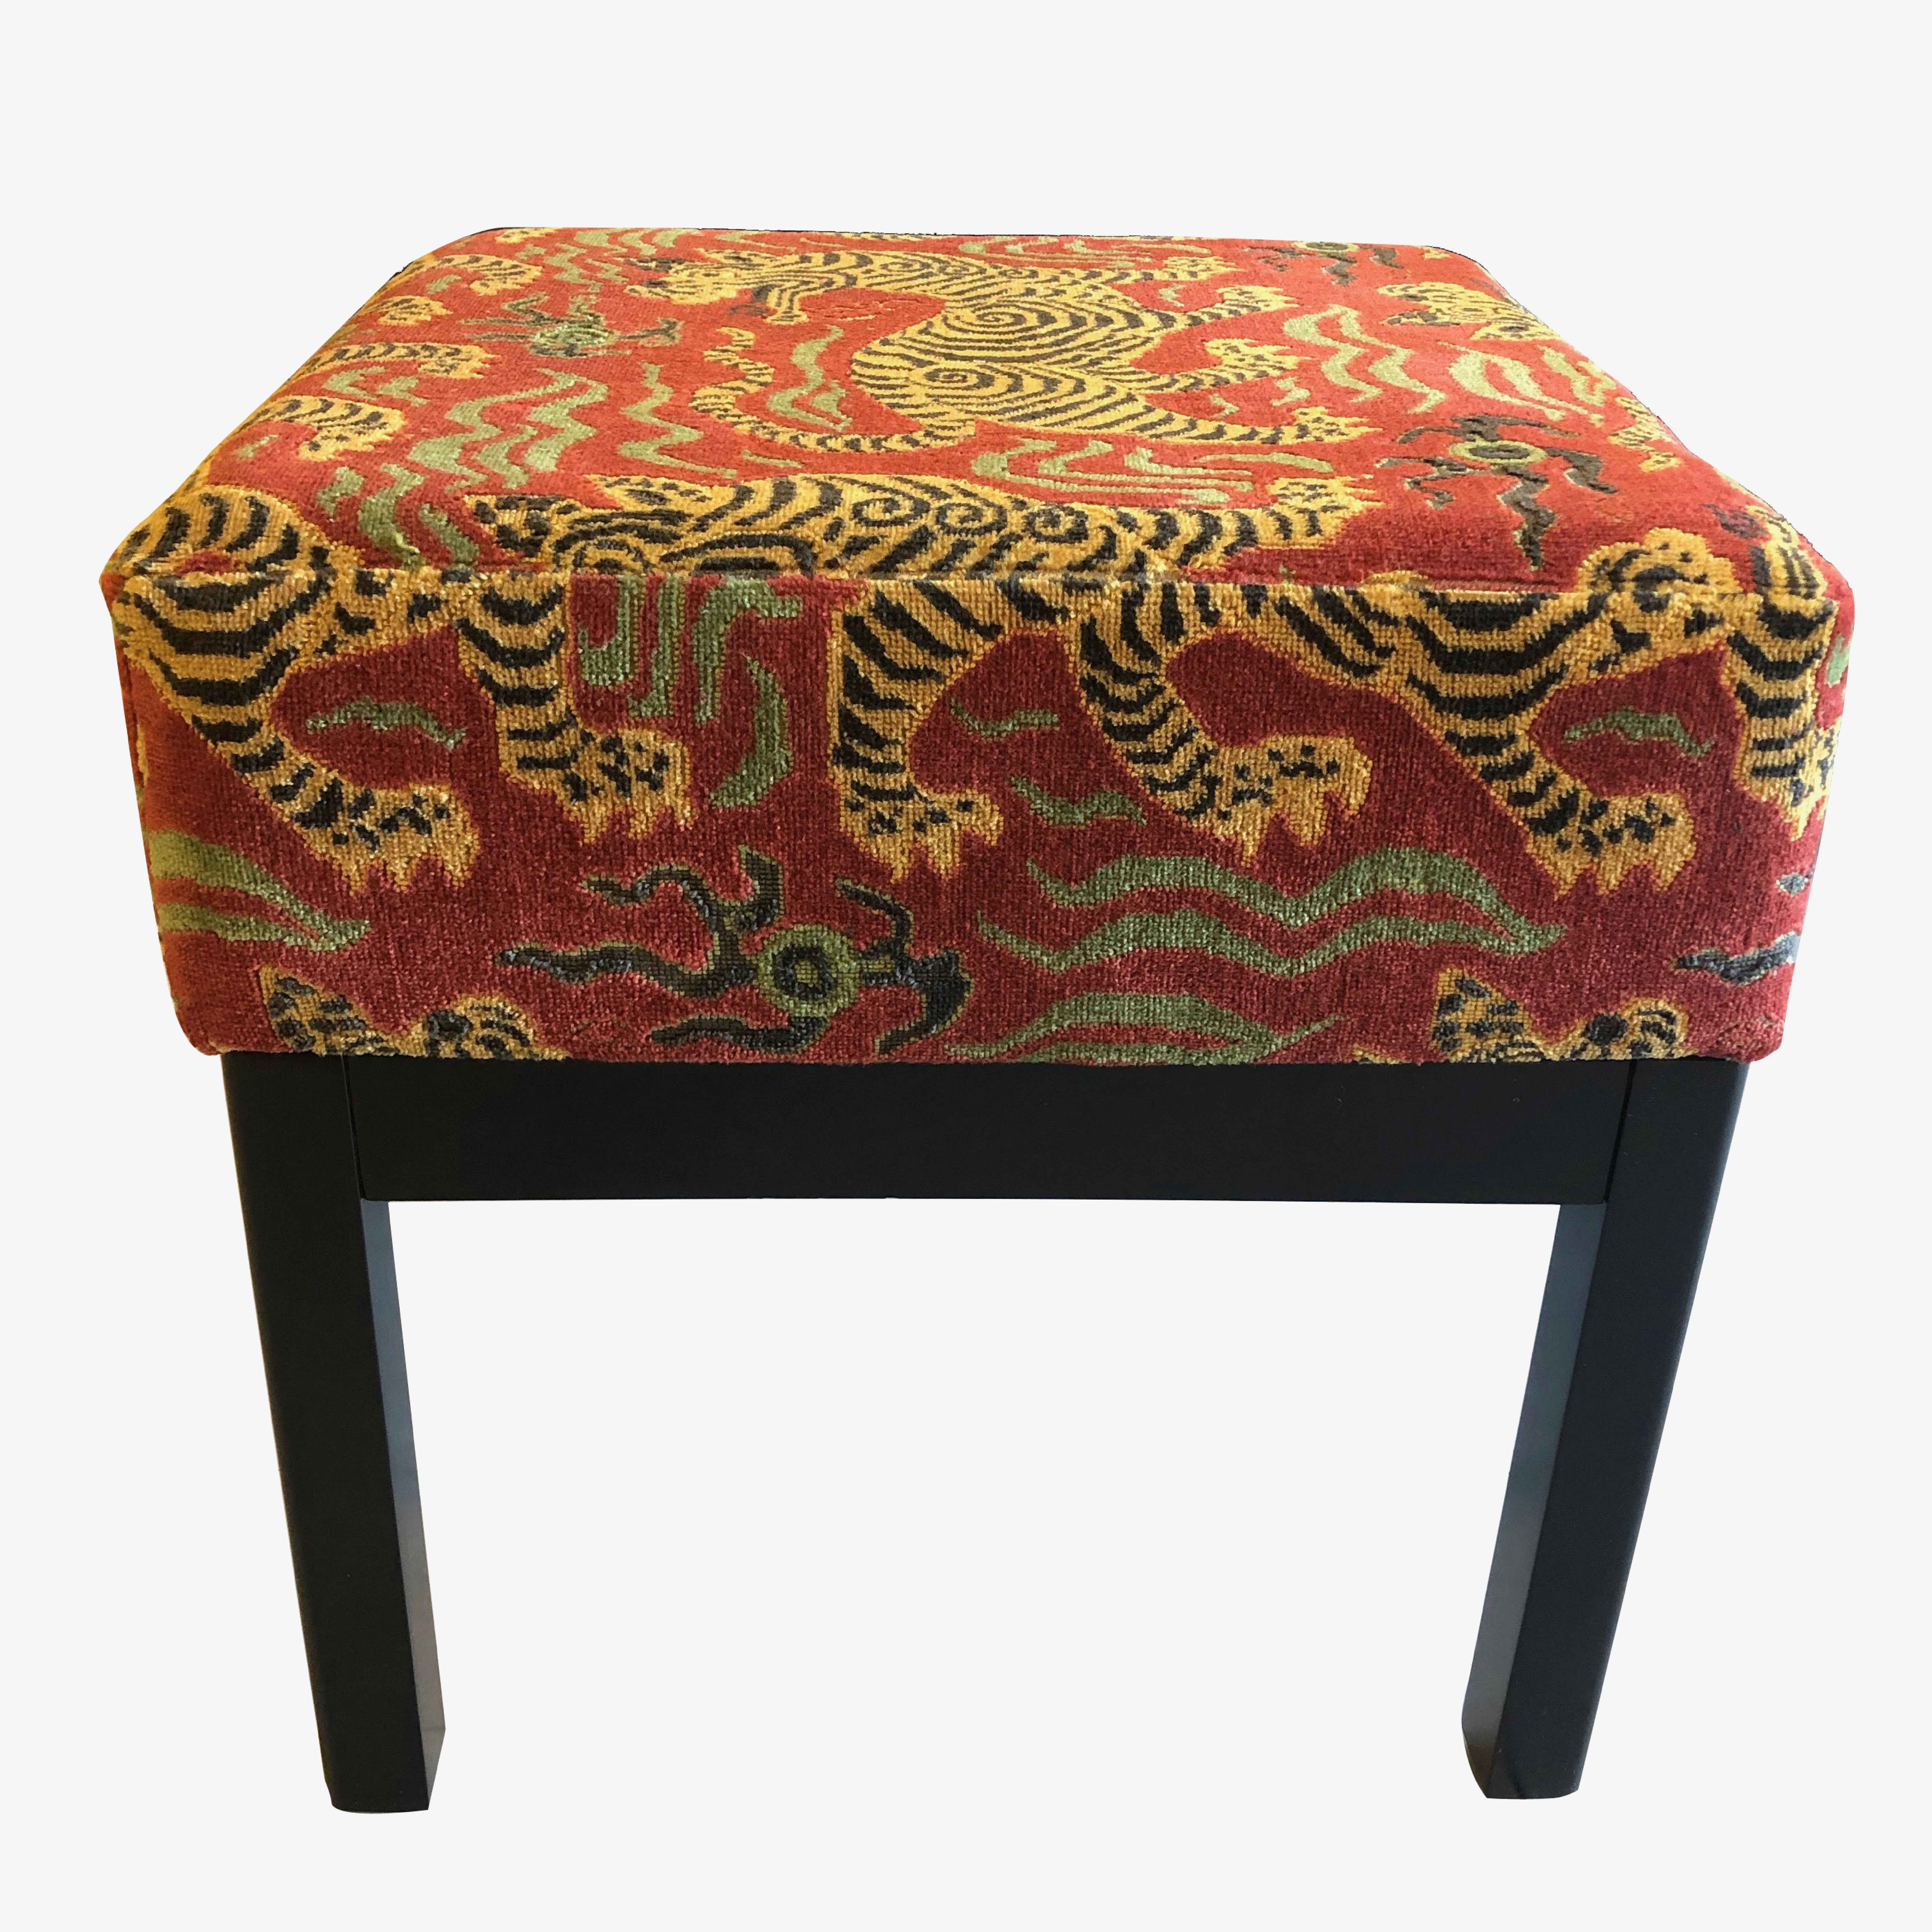 A pair of square stools with cushions reupholstered with Clarence House Tibet dragon velvet fabric in cinnabar, a very high end fabulous fabric. The solid wooden frames have been refinished in ebony. These modifications have been done recently and